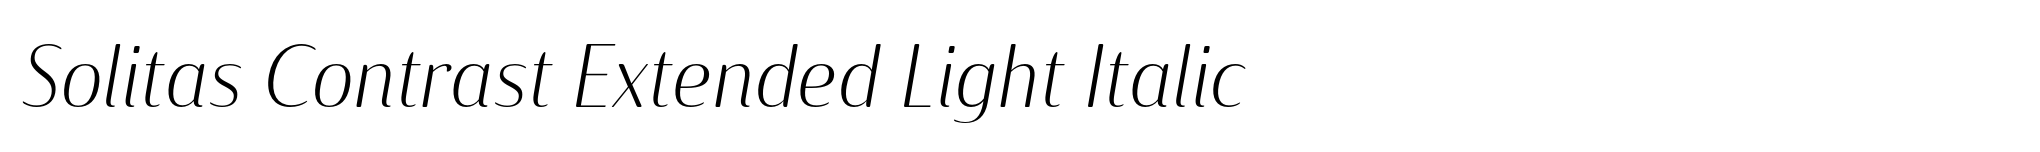 Solitas Contrast Extended Light Italic image